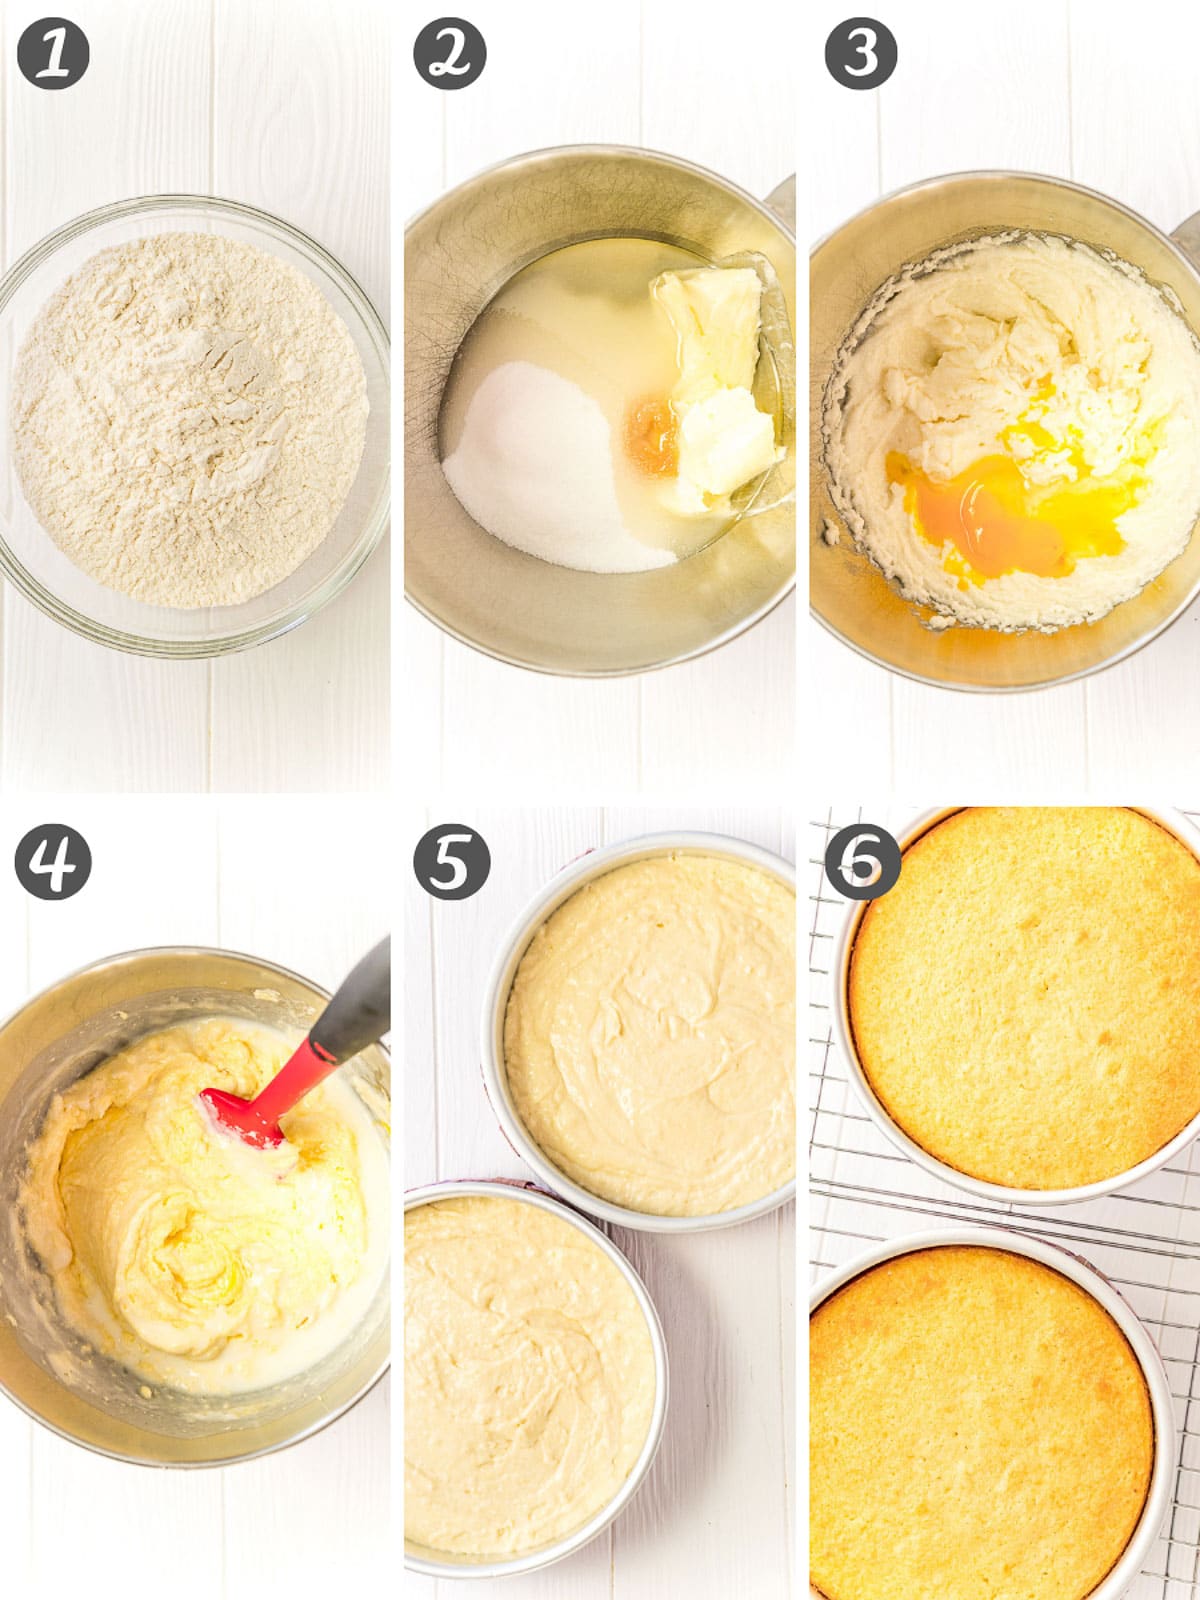 Step-by-step photo collage showing how to make yellow cake.